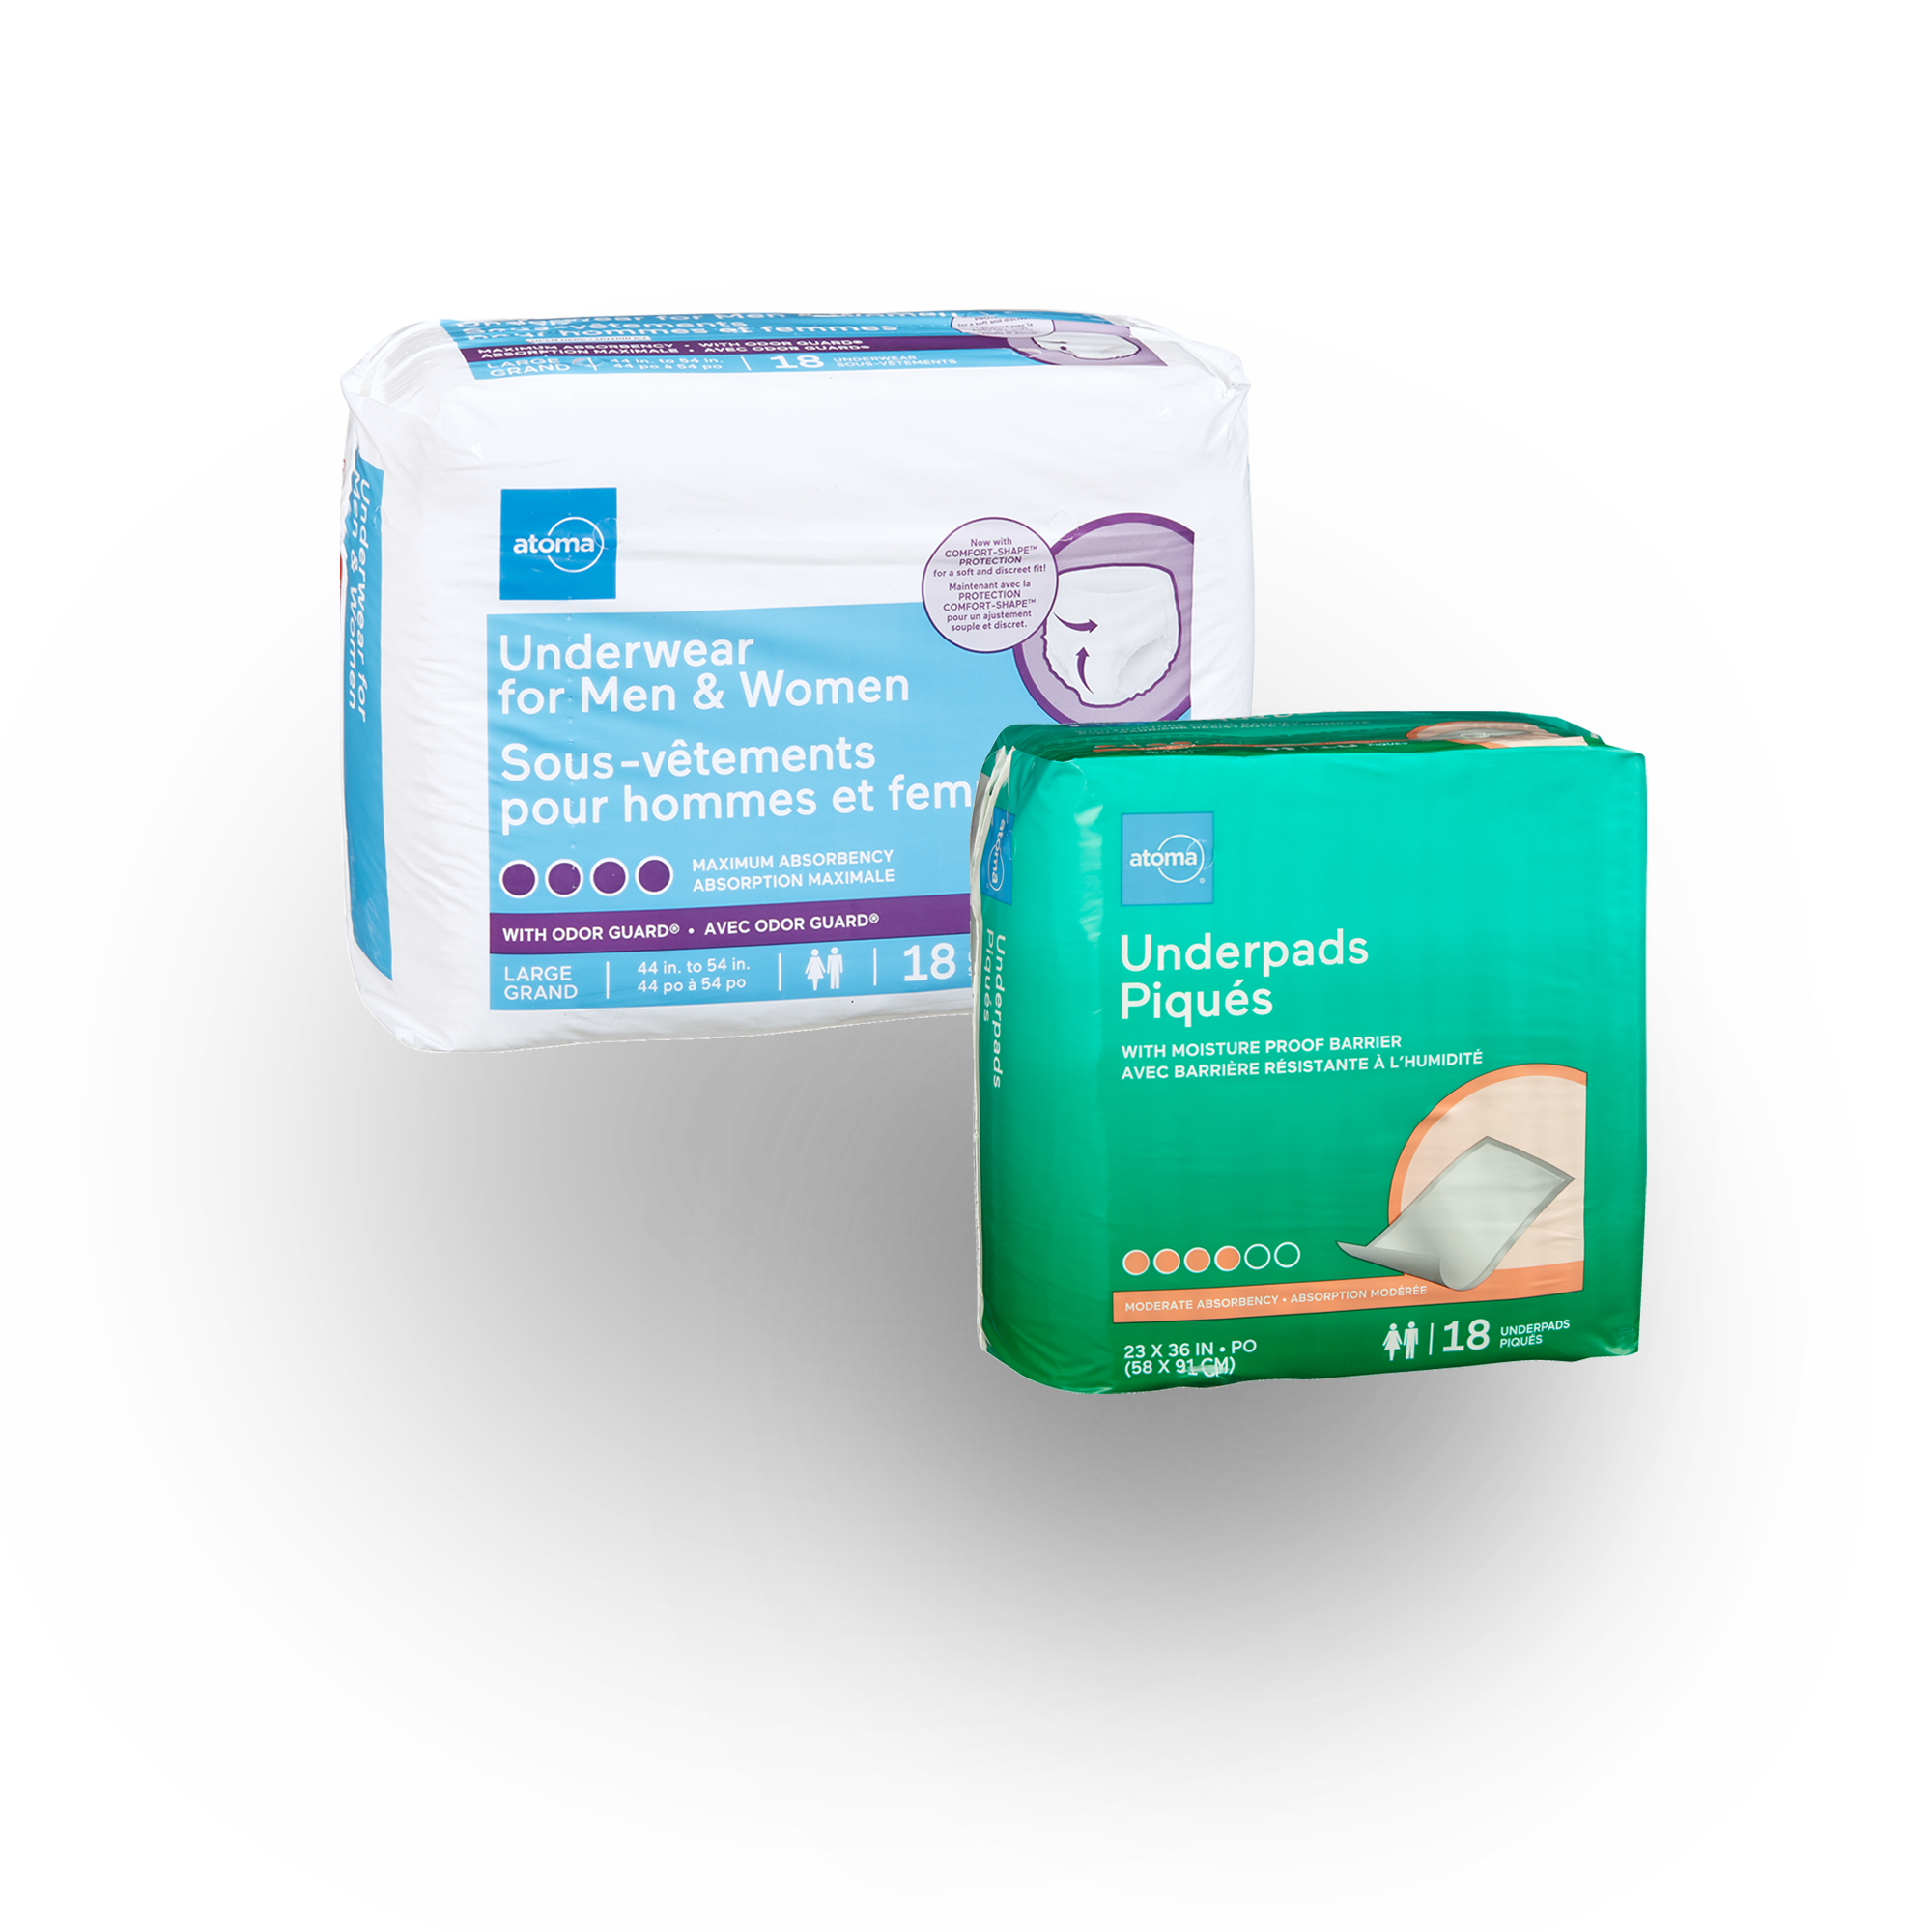 atoma incontinence products for those with reduced mobility